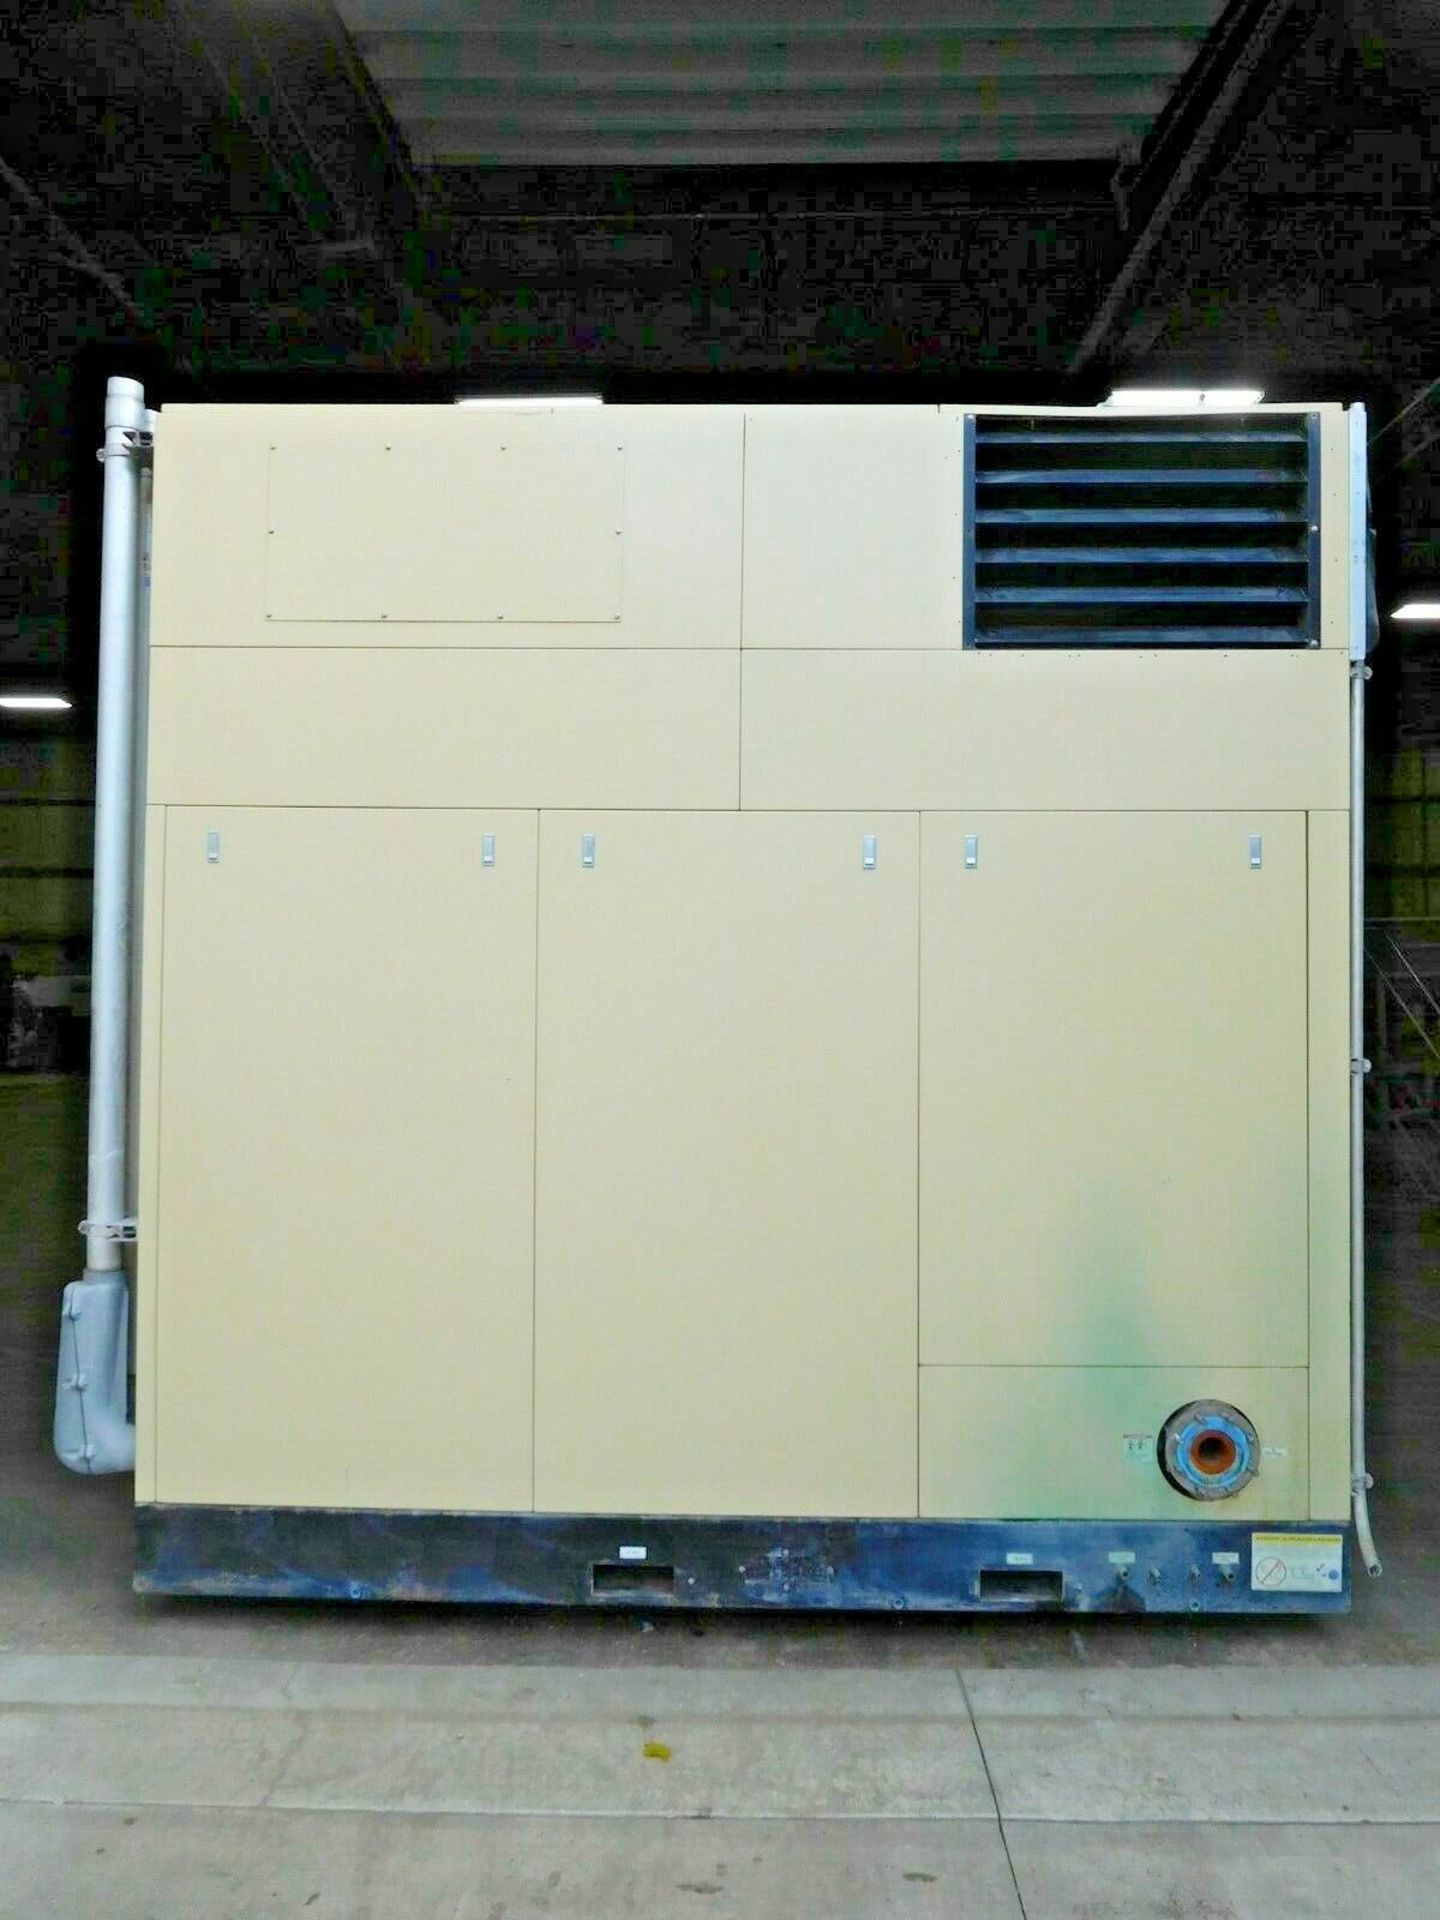 Ingersoll Rand H300 Rotary Screw Air Compressor. 1264 ACFM. 350 HP. - Image 6 of 7